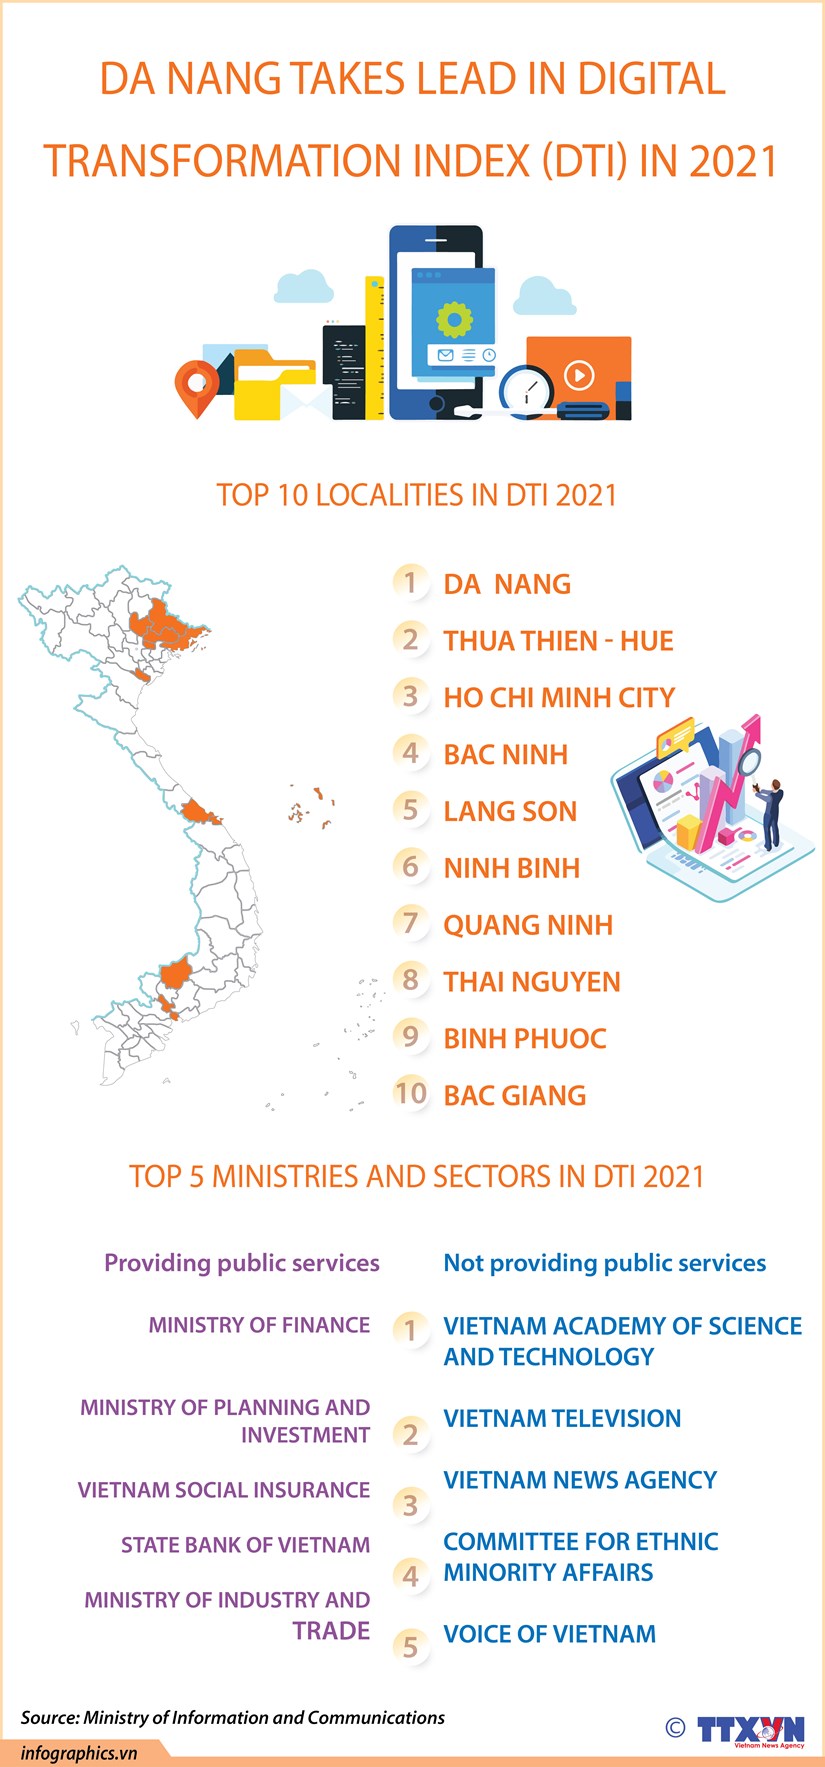 Da Nang takes lead in Digital Transformation Index in 2021 hinh anh 1